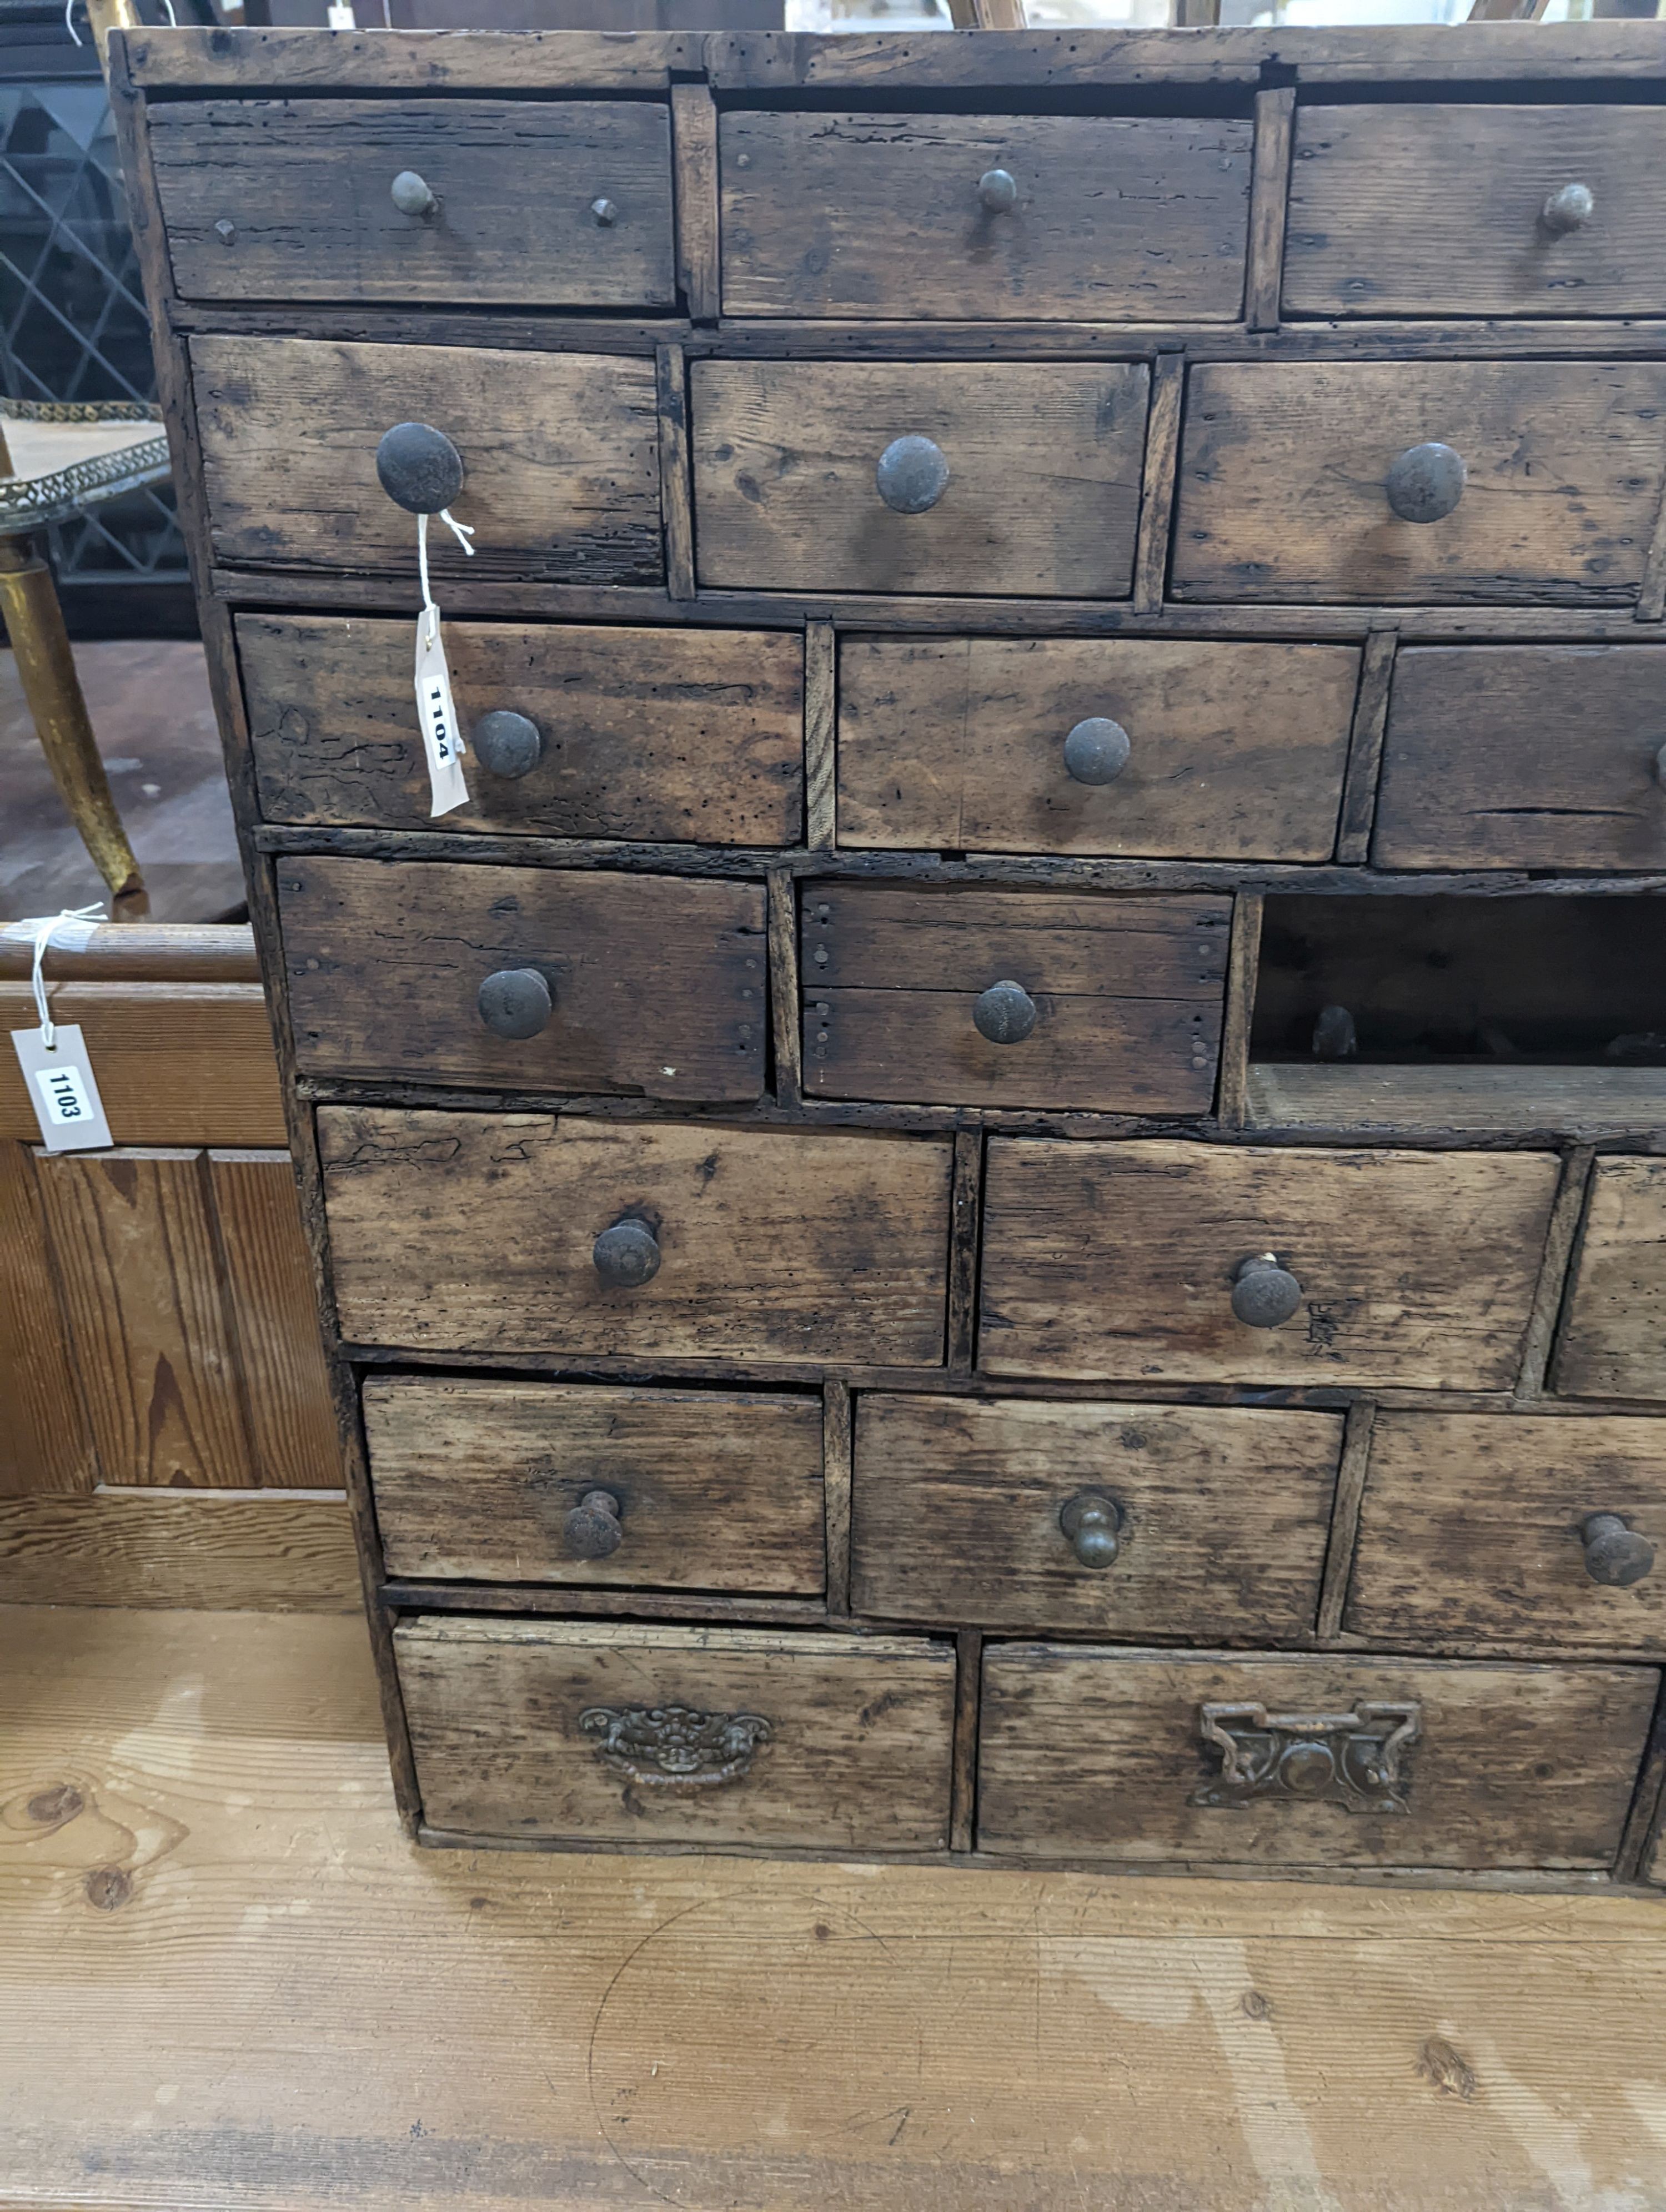 A 19th century fruitwood apothecary chest from the estate of Mary Wondrausch, containing rock samples and archaeological finds. width 91cm, depth 13cm, height 80cm (lacks three drawers)